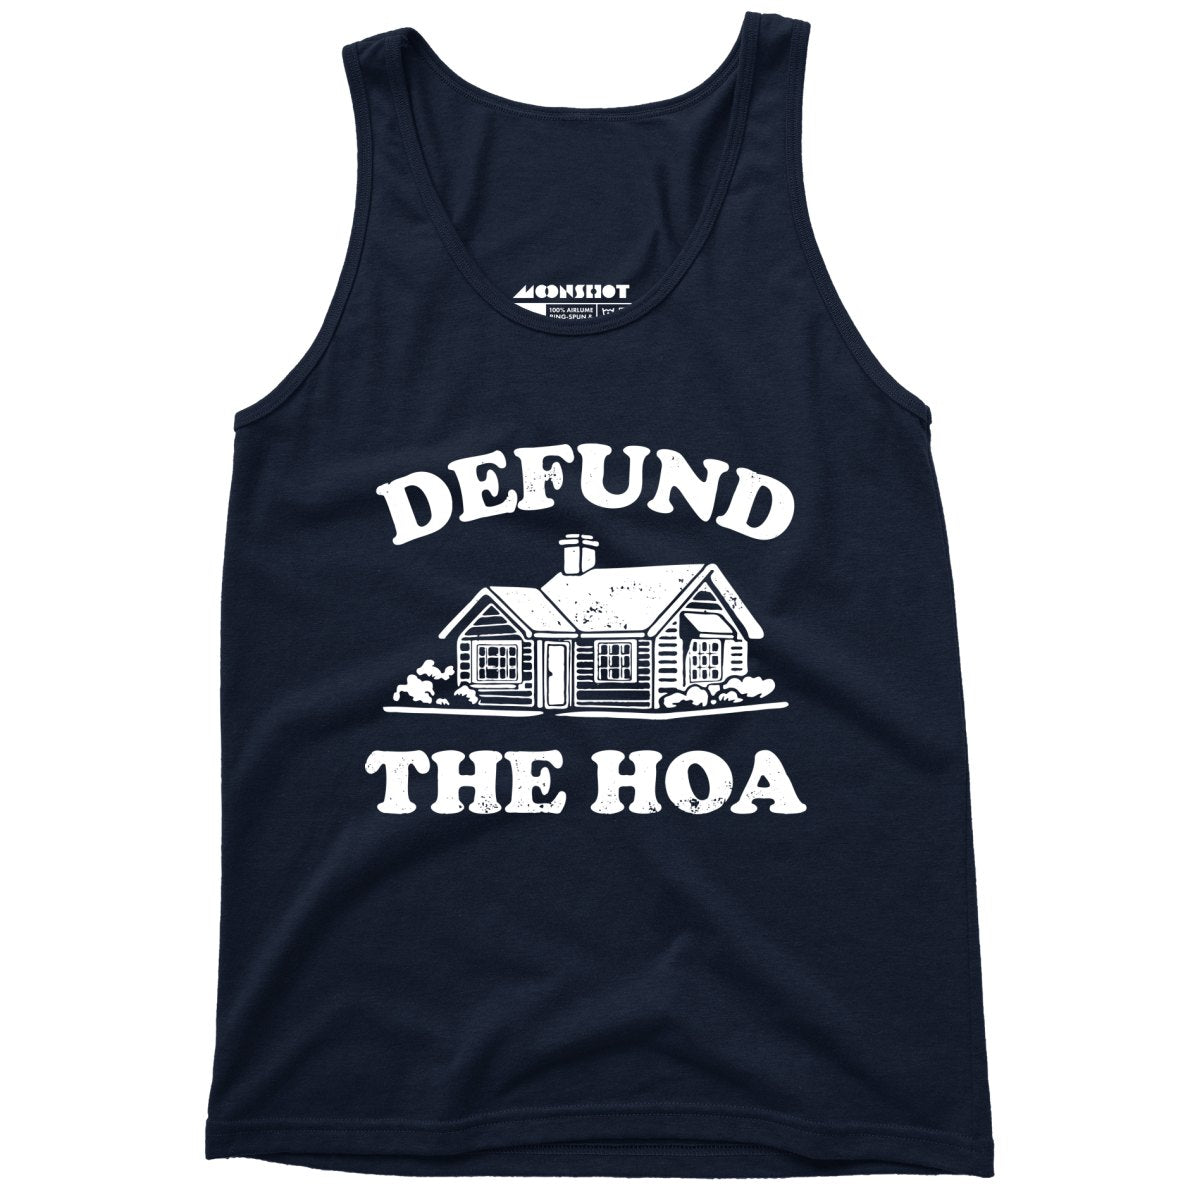 Defund the HOA - Unisex Tank Top